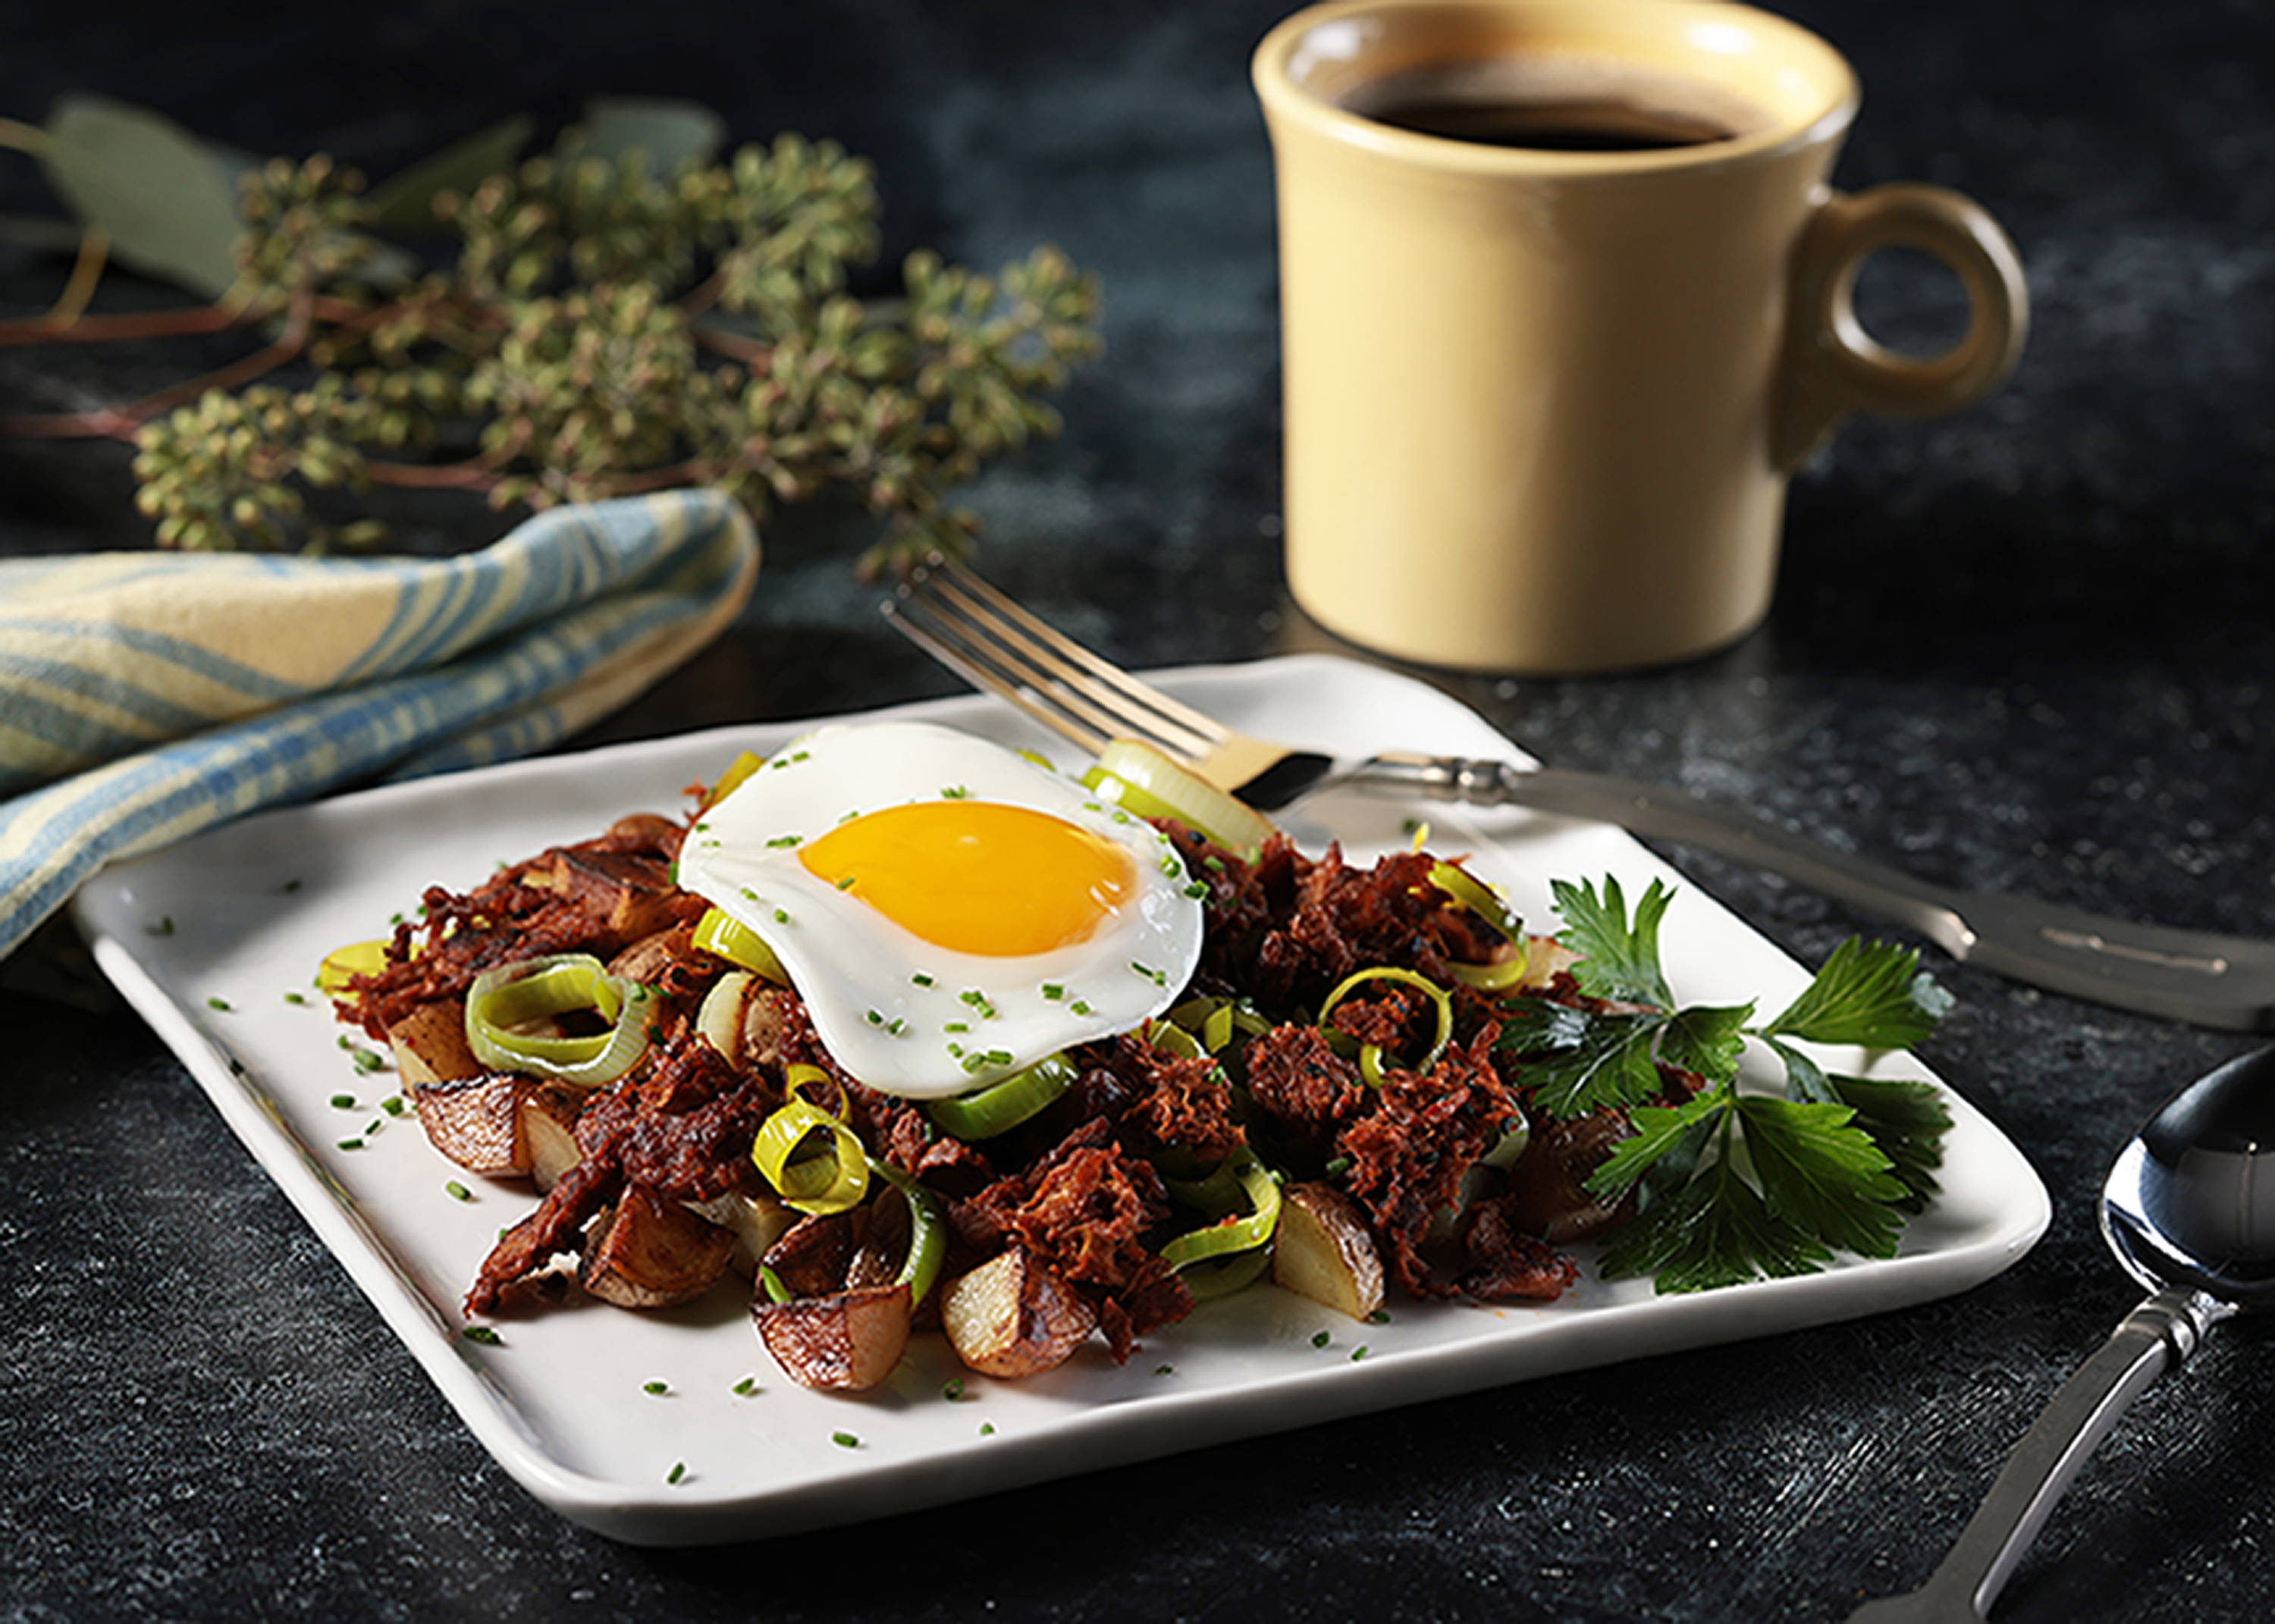 Texas BBQ Harvest Shreds hash with new potatoes and leeks, and topped with a fried egg, on a square white plate with a fork. Folded yellow and blue napkin and a yellow mug of coffee.